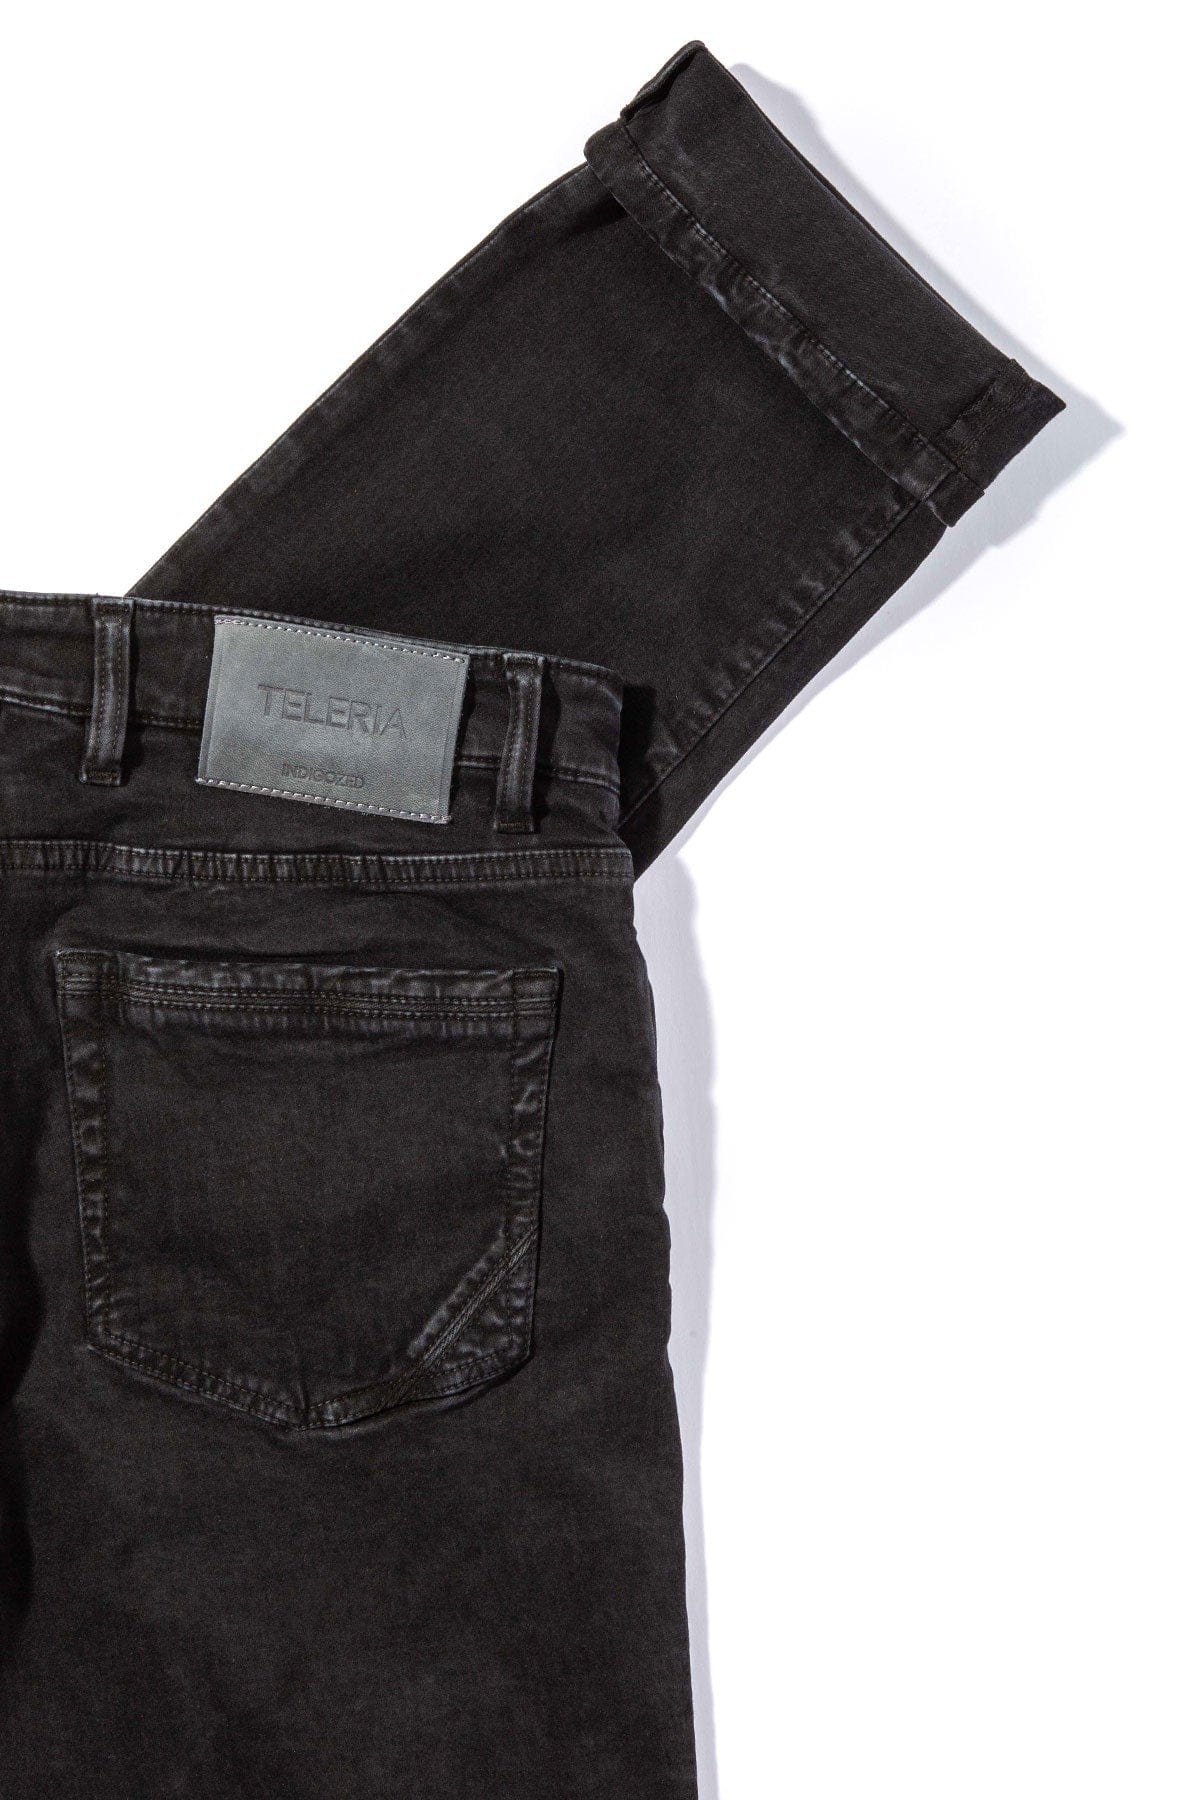 Ryland Rugged Soft Touch Cotton Jeans in Nero - AXEL'S